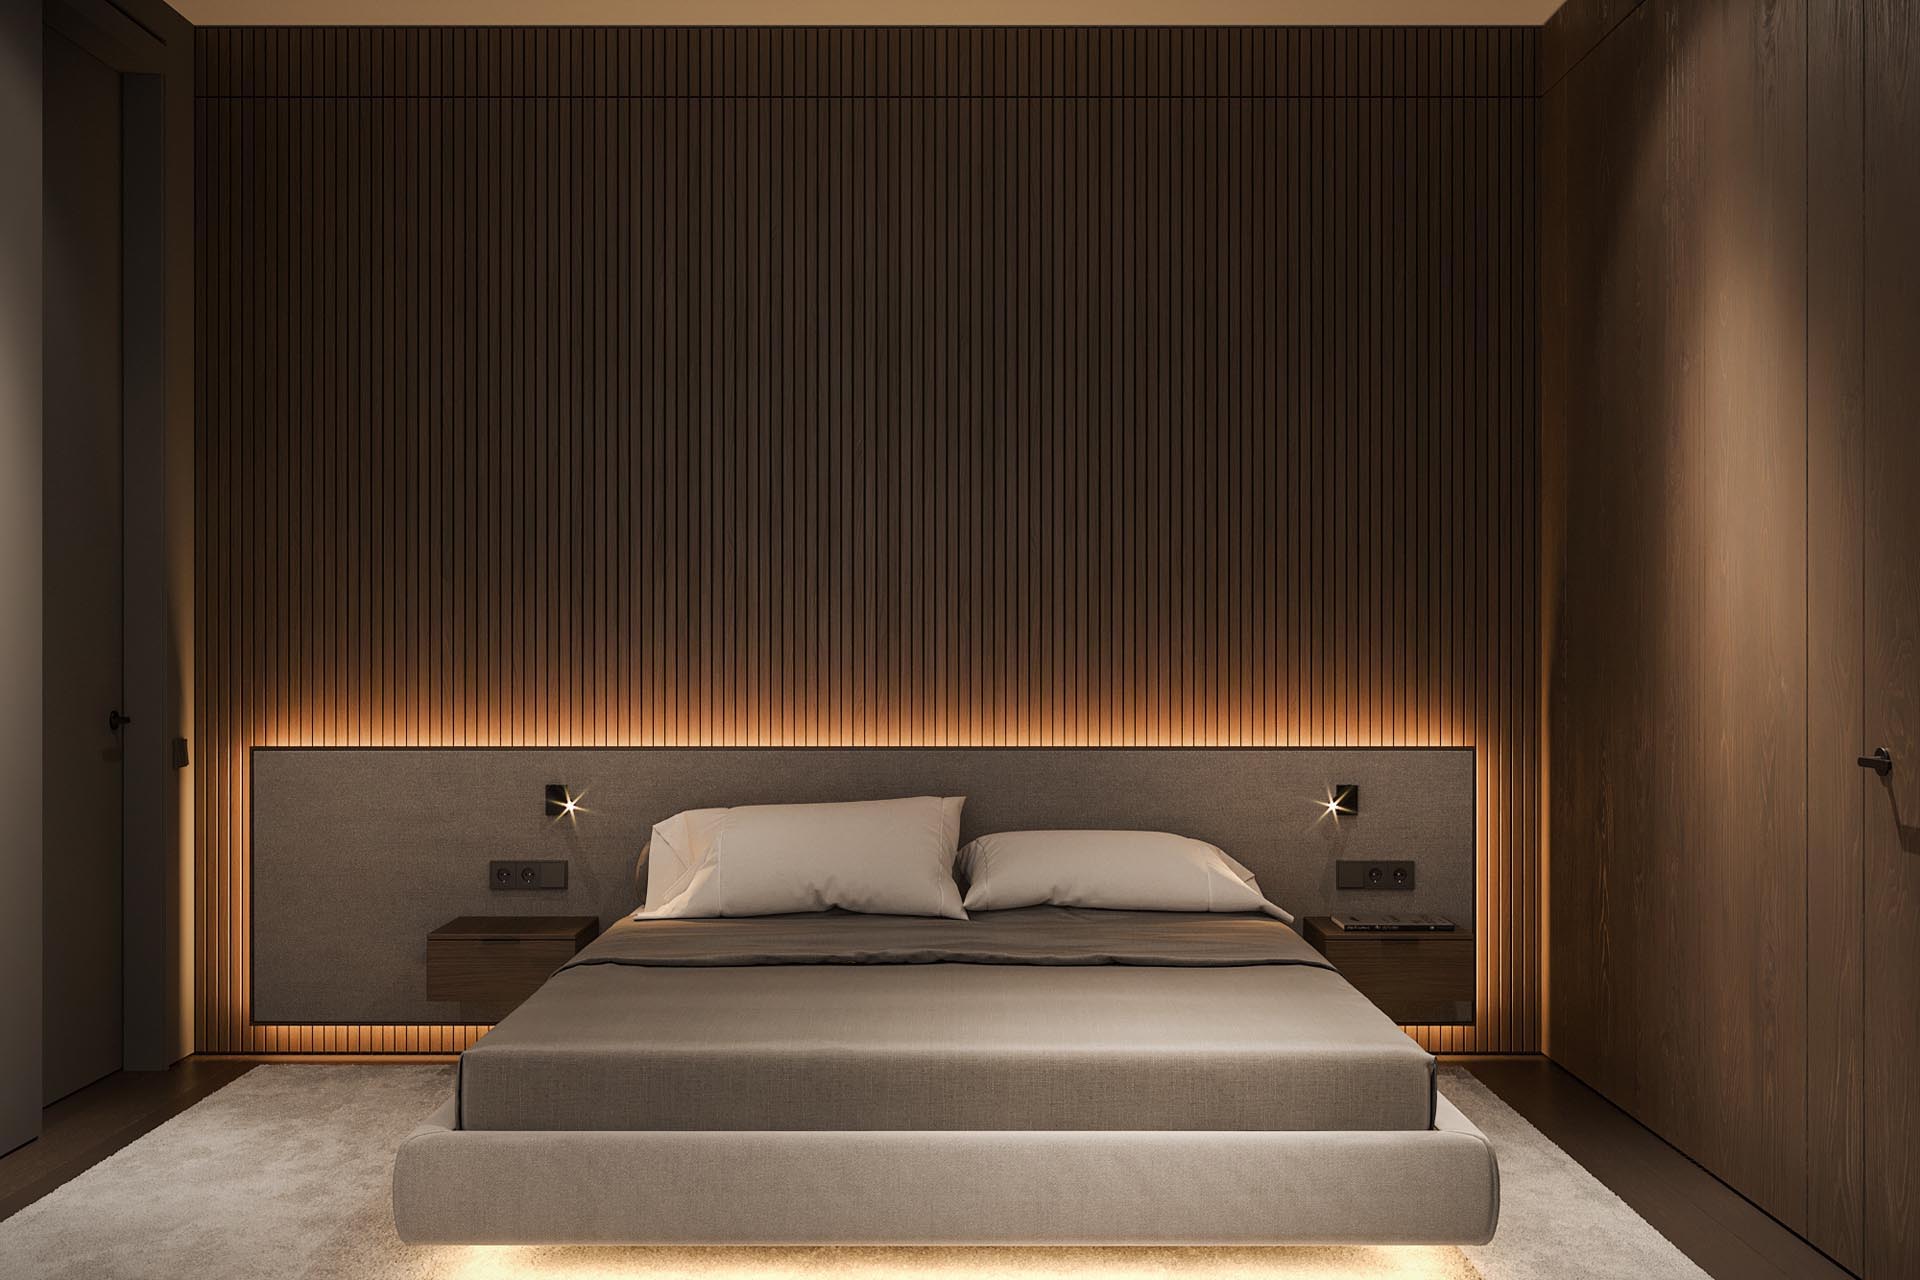 Bedroom Lighting Ideas - A modern bedroom with a headboard that showcases hidden LED lighting.